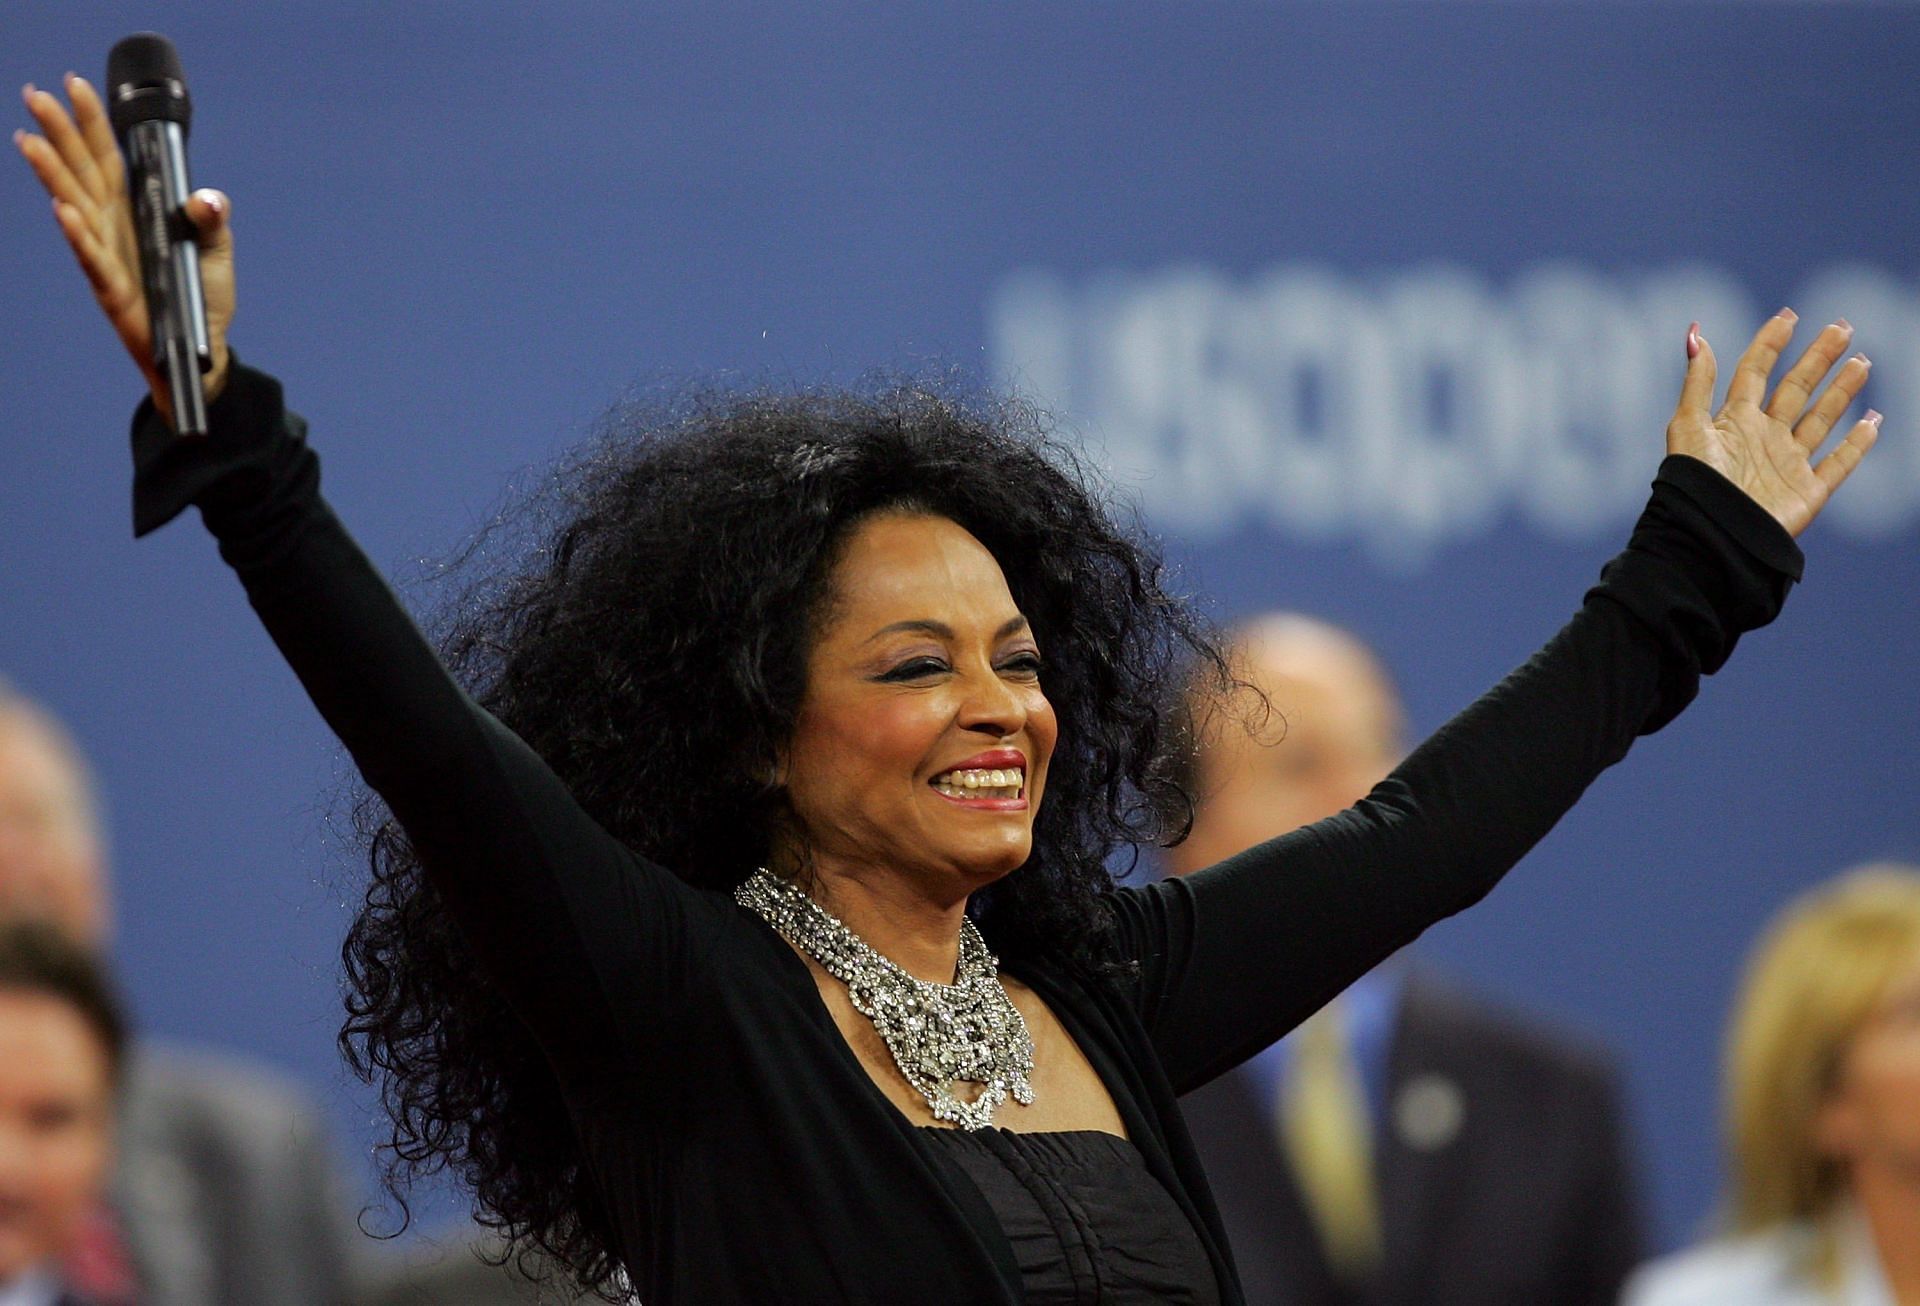 Diana Ross during 2006 US Open Tennis (Image Via Getty Images)